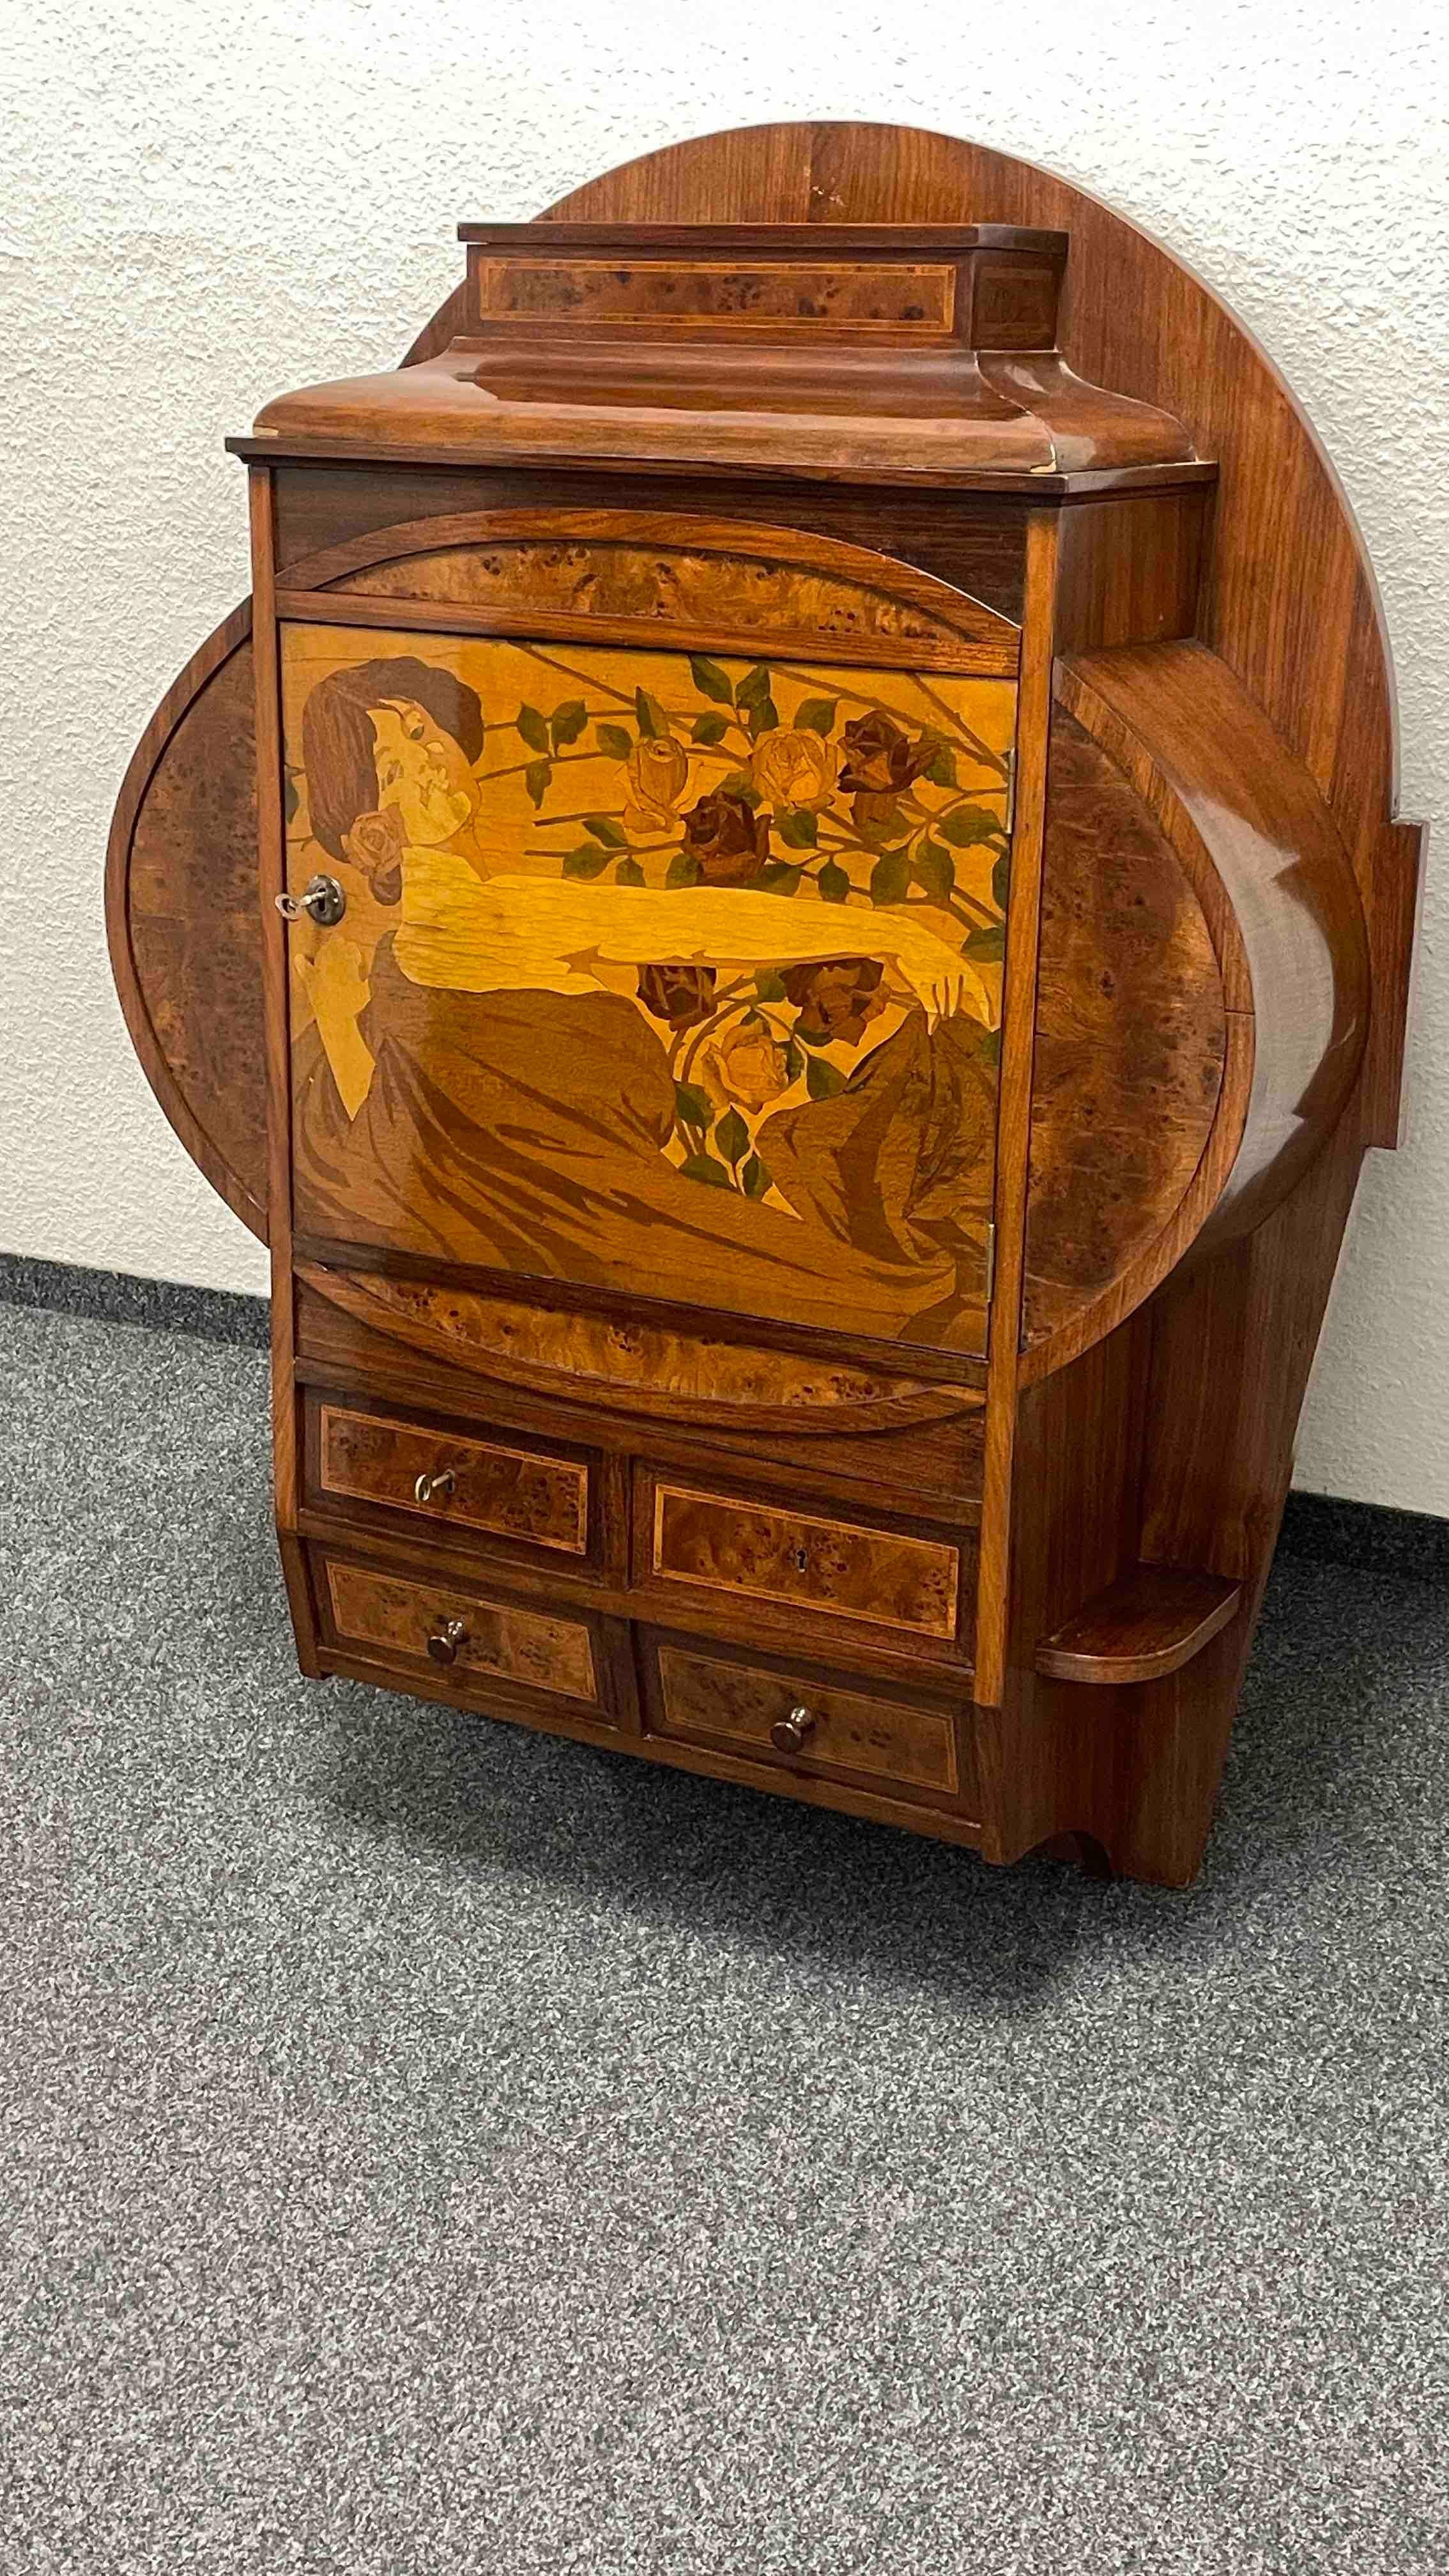 Wall Cabinet with Marquetry Inlays and Drawer Art Nouveau Vienna Austria, 1900s For Sale 7